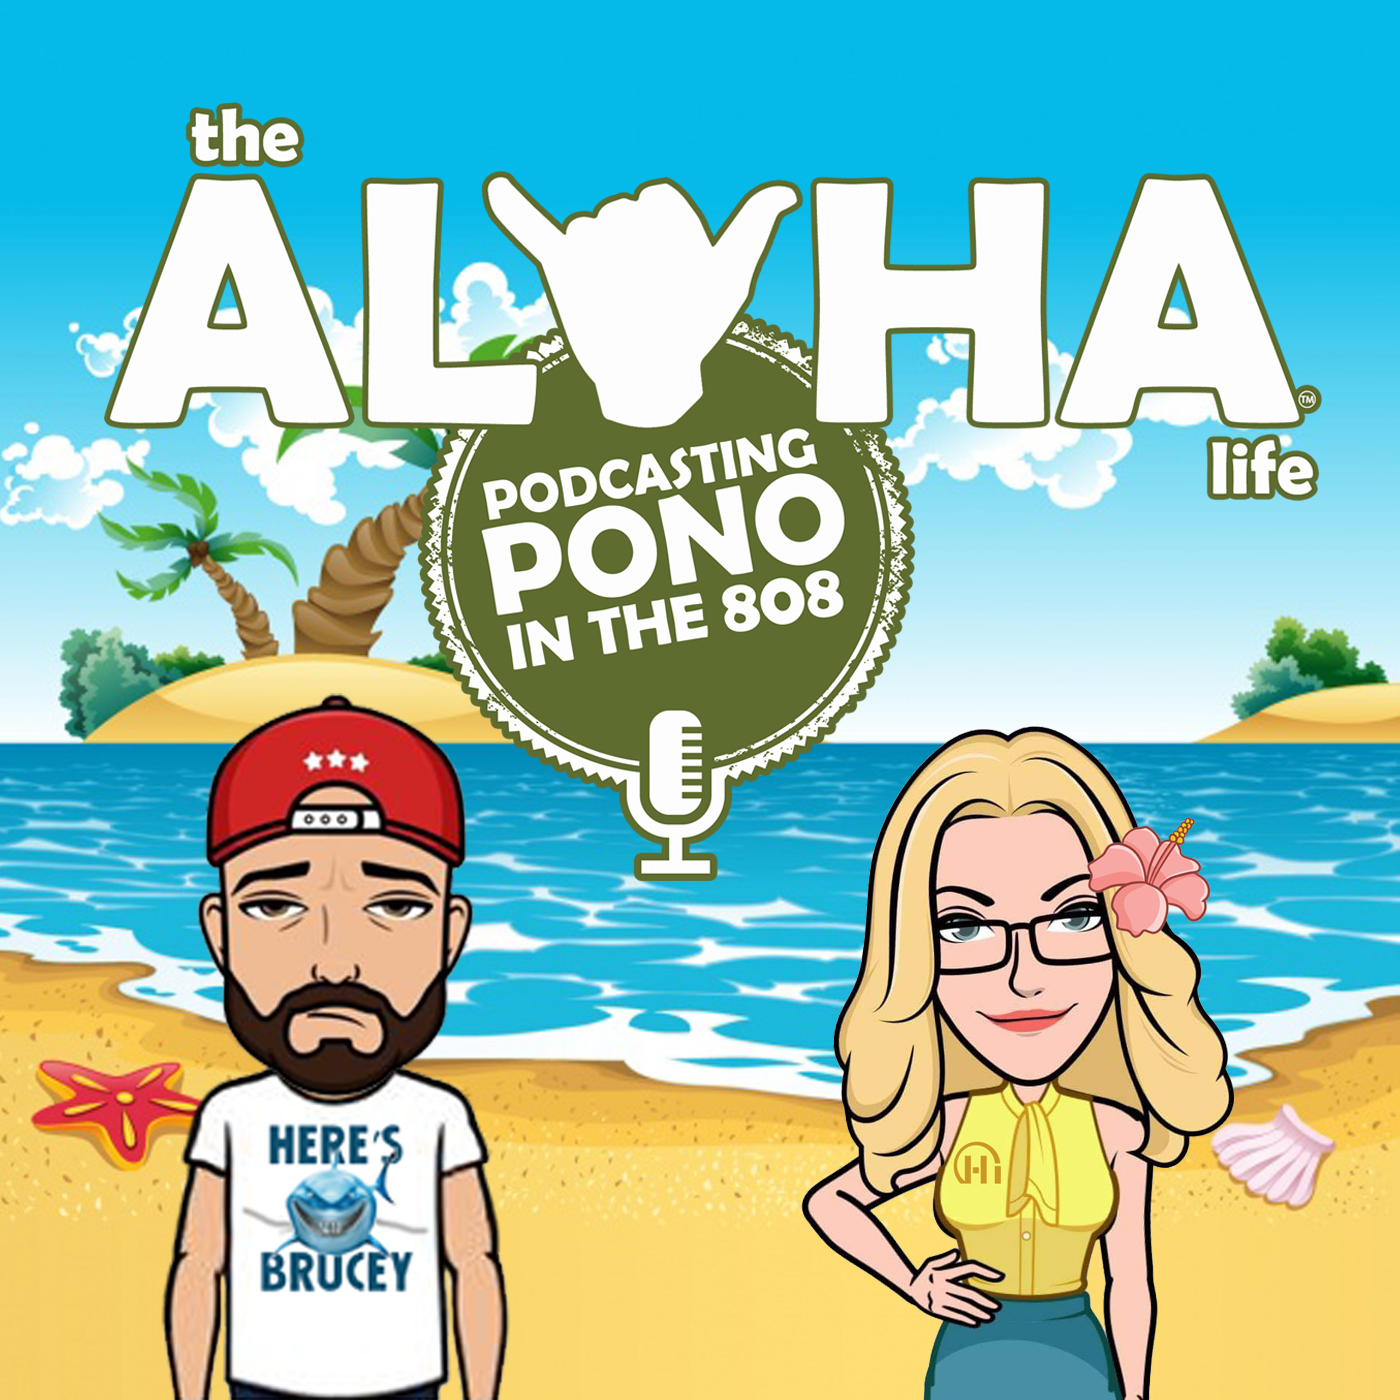 Living the Aloha Life - Podcasting Pono in the 808 artwork